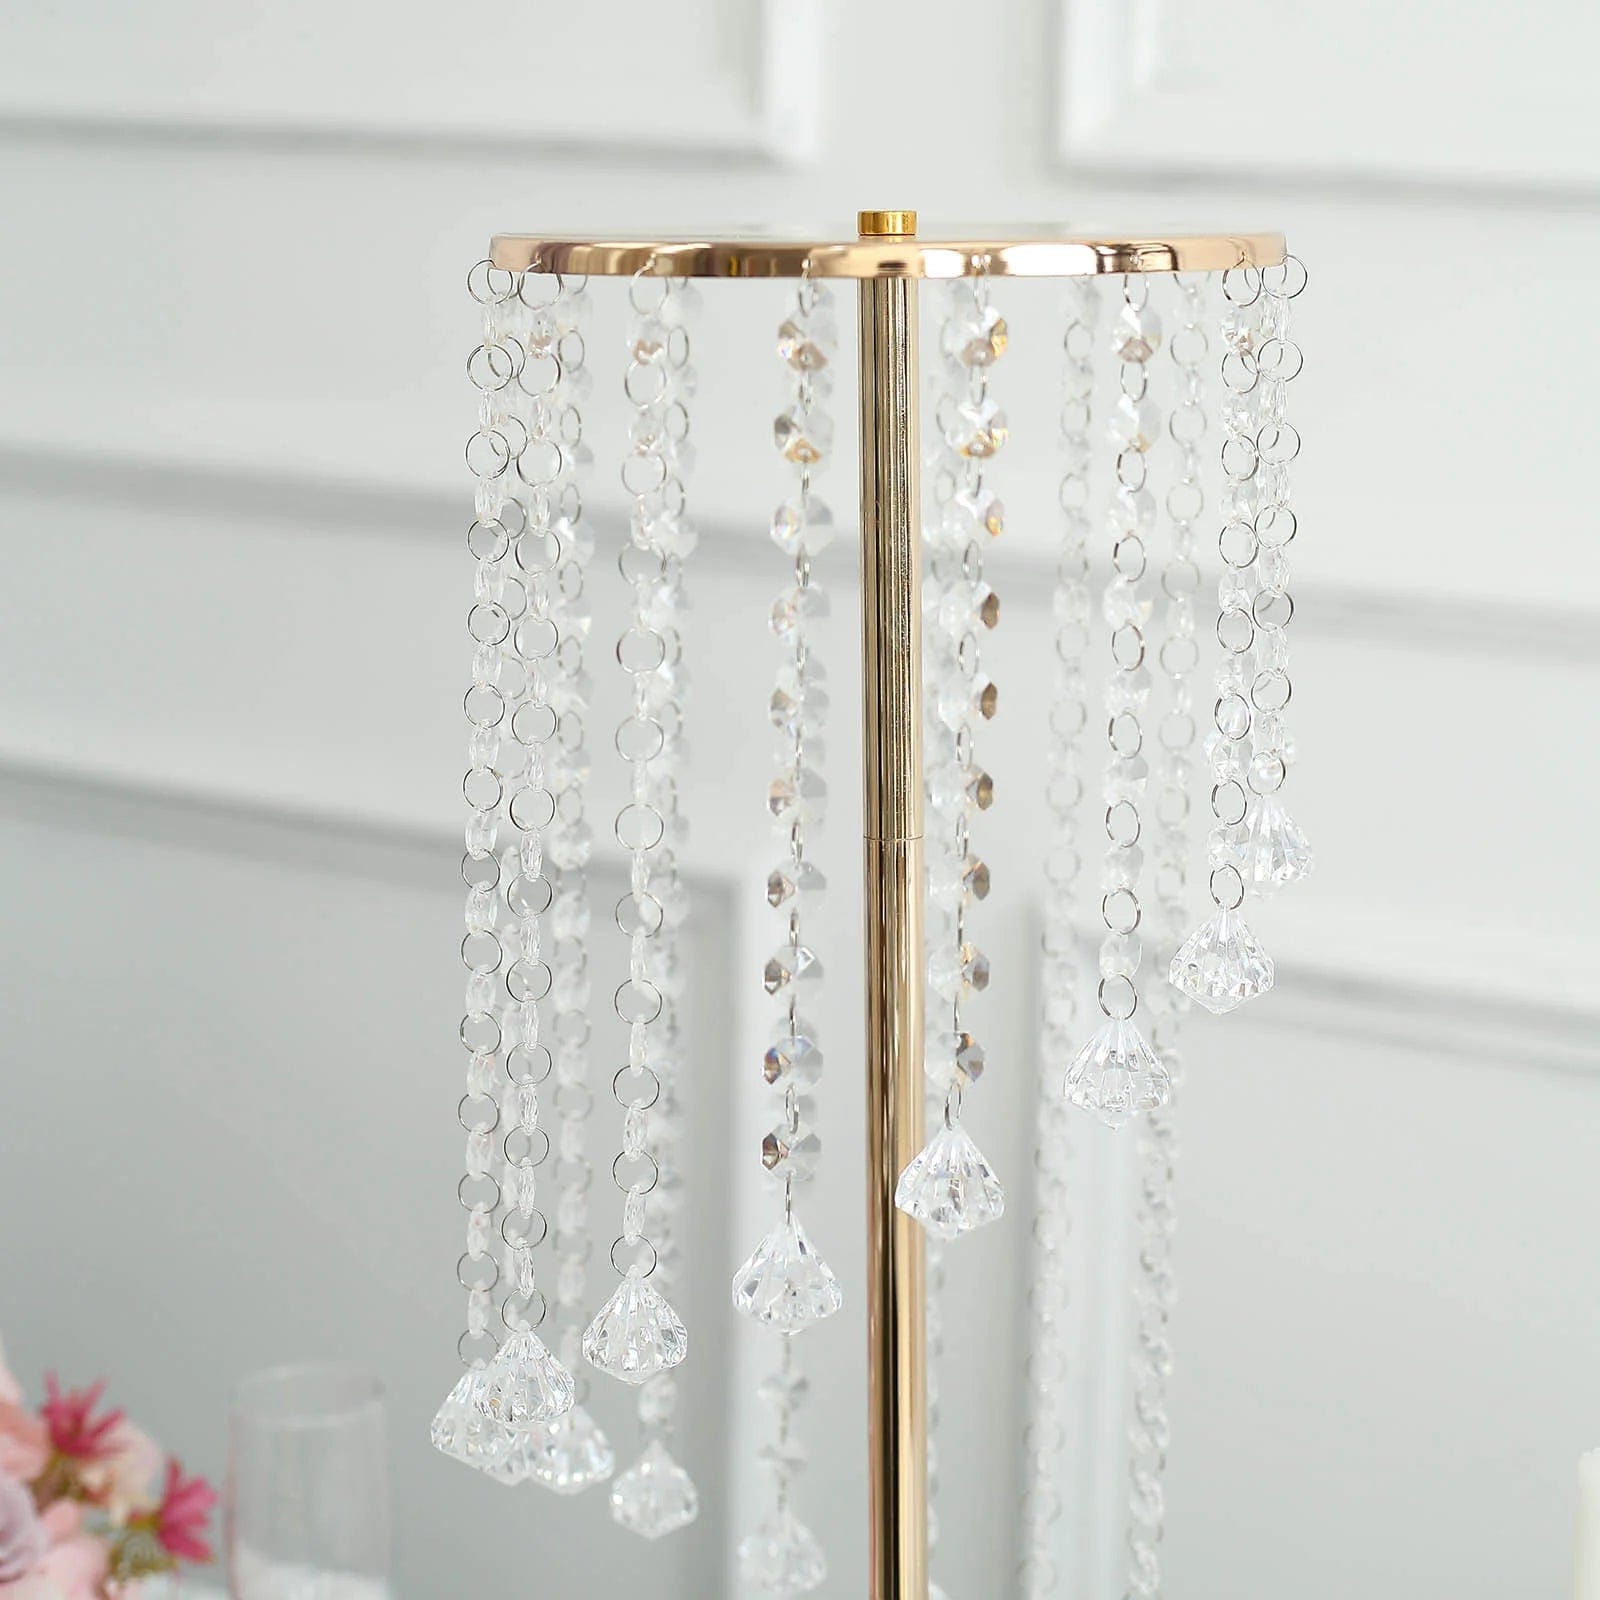 2 Gold 24 in Metal Flower Display Stands with Spiral Hanging Crystal Beads